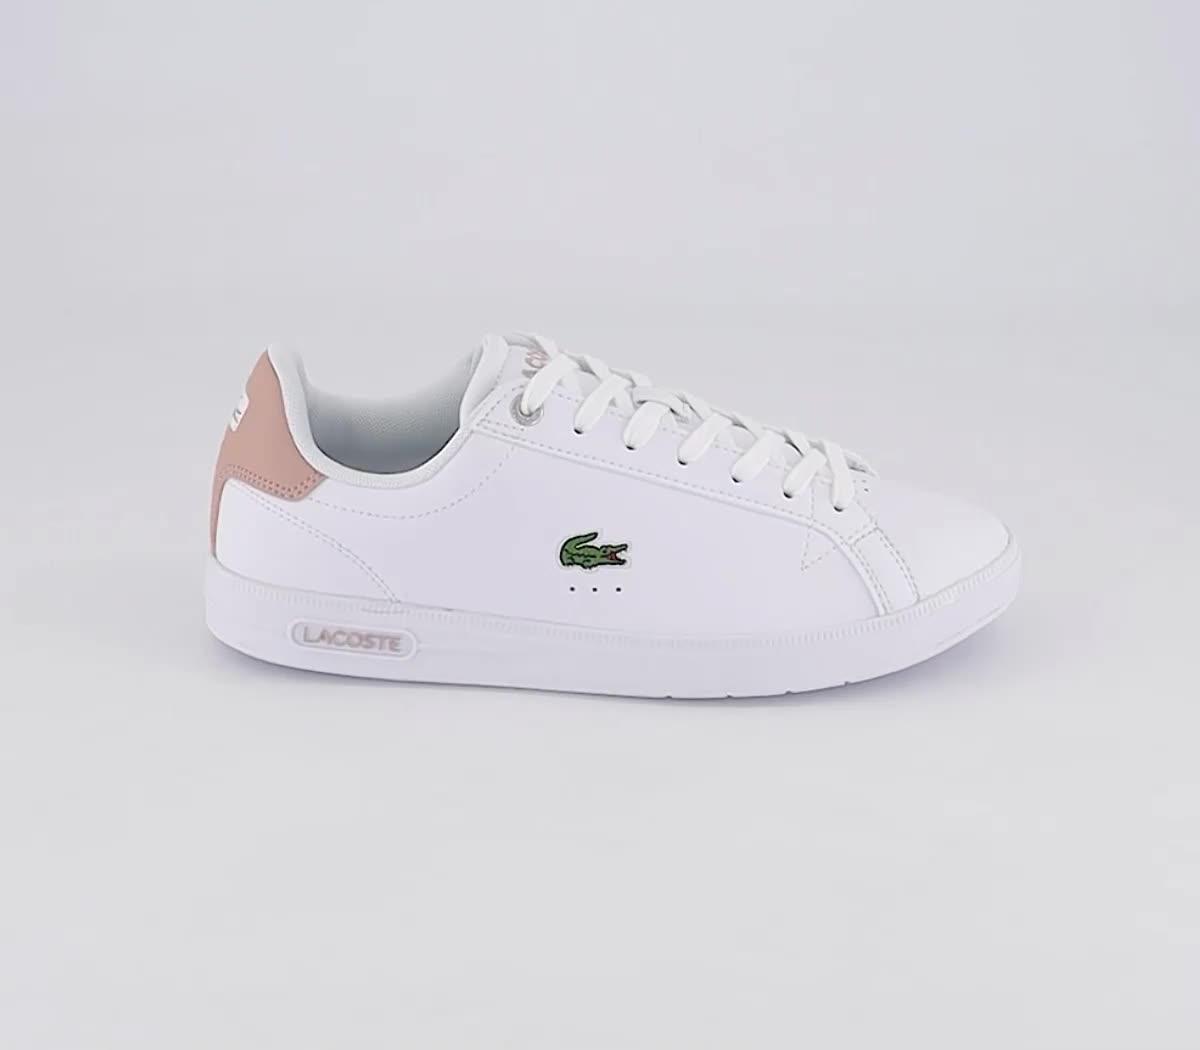 Graduate Pro Trainers Pink White - Women's Trainers